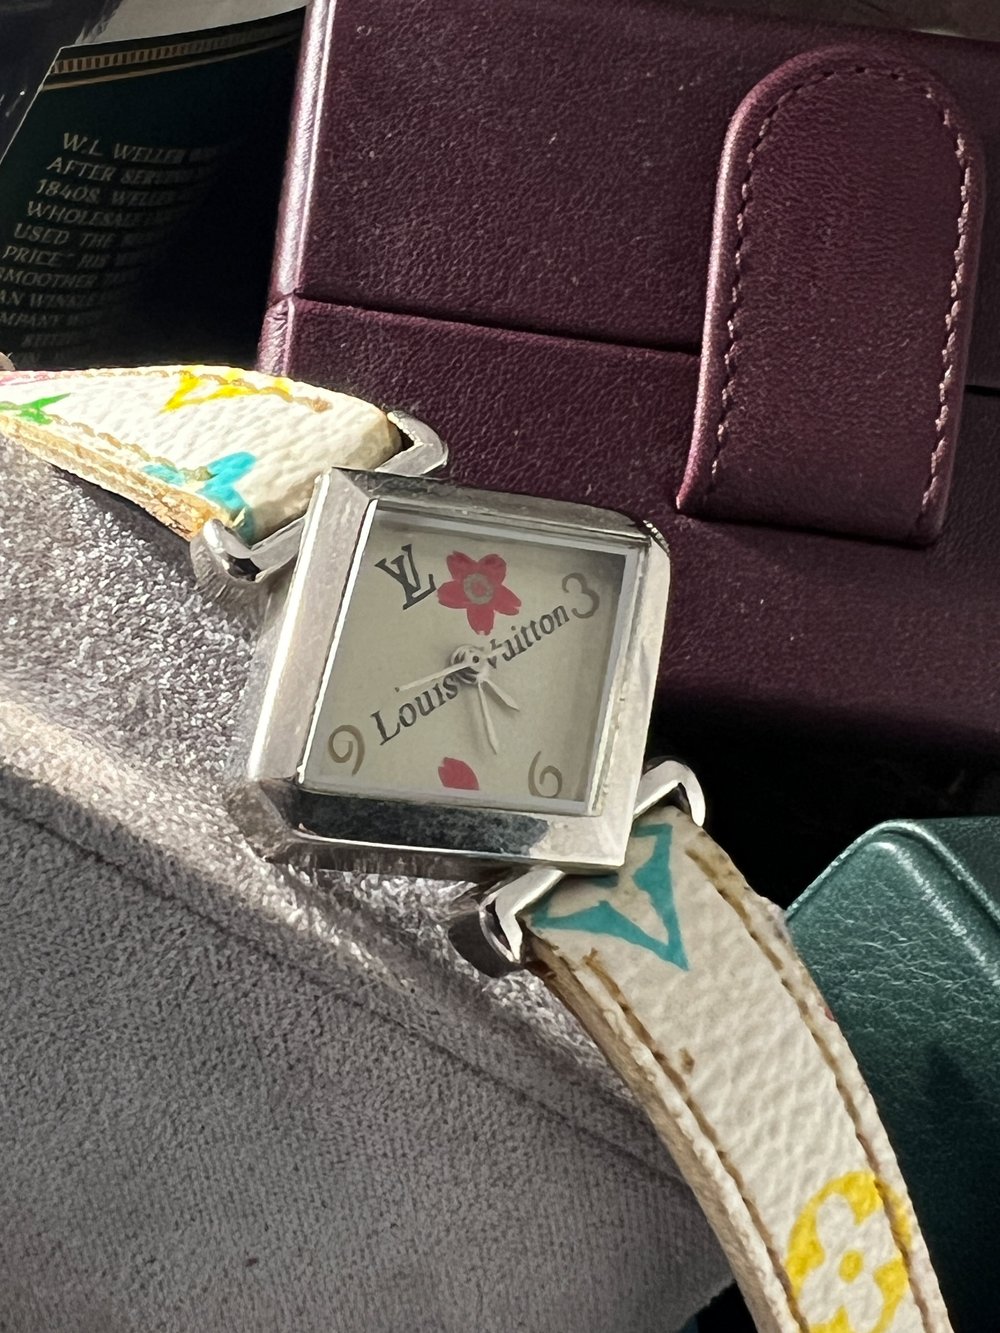 Real Louis Vuitton watch or not?